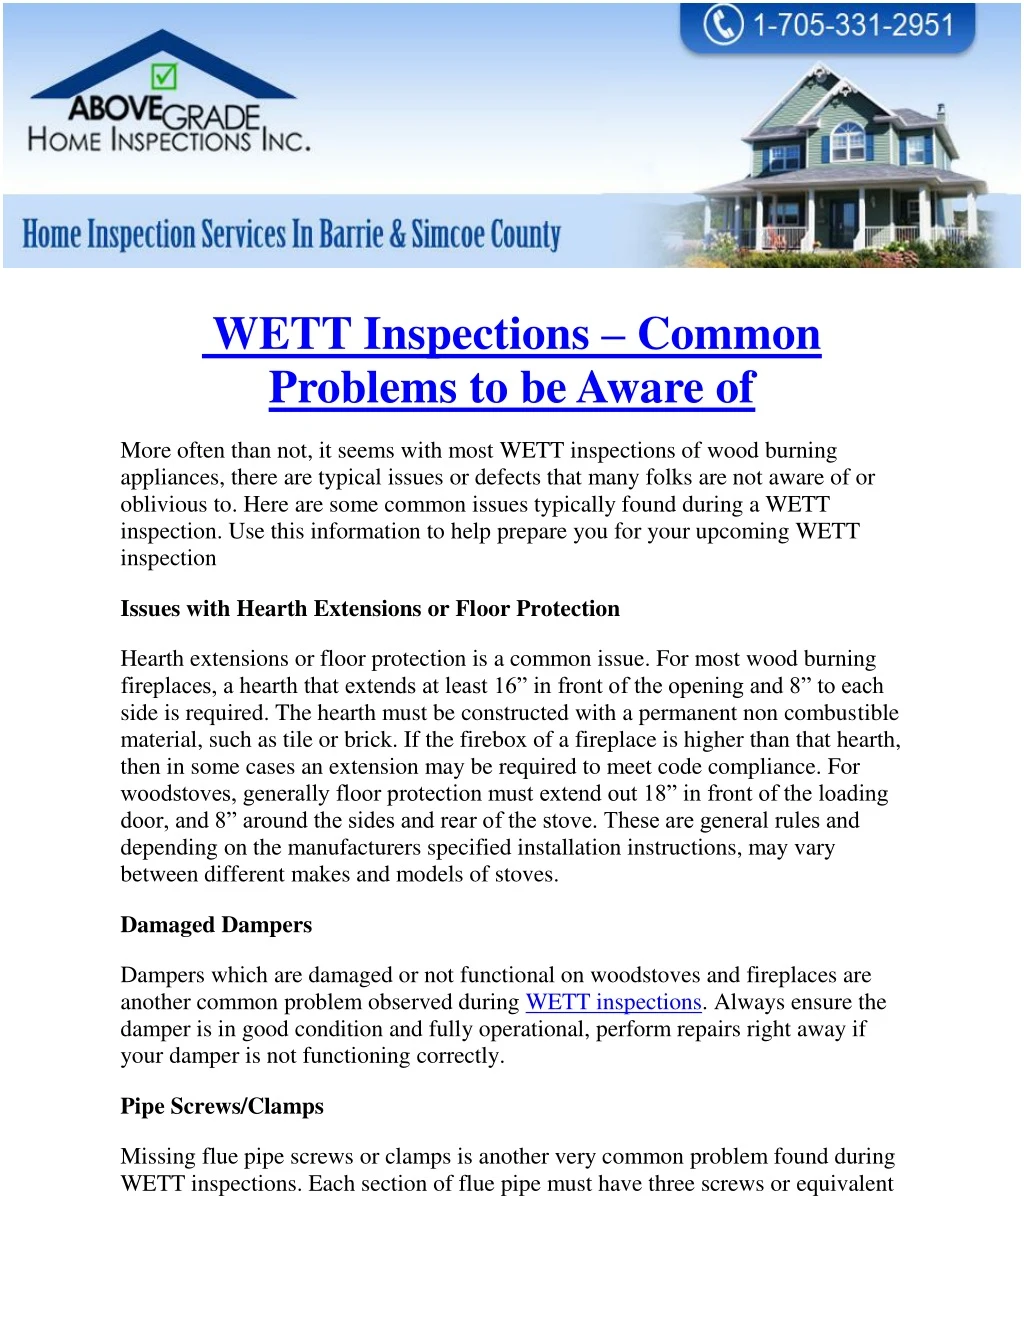 wett inspections common problems to be aware of